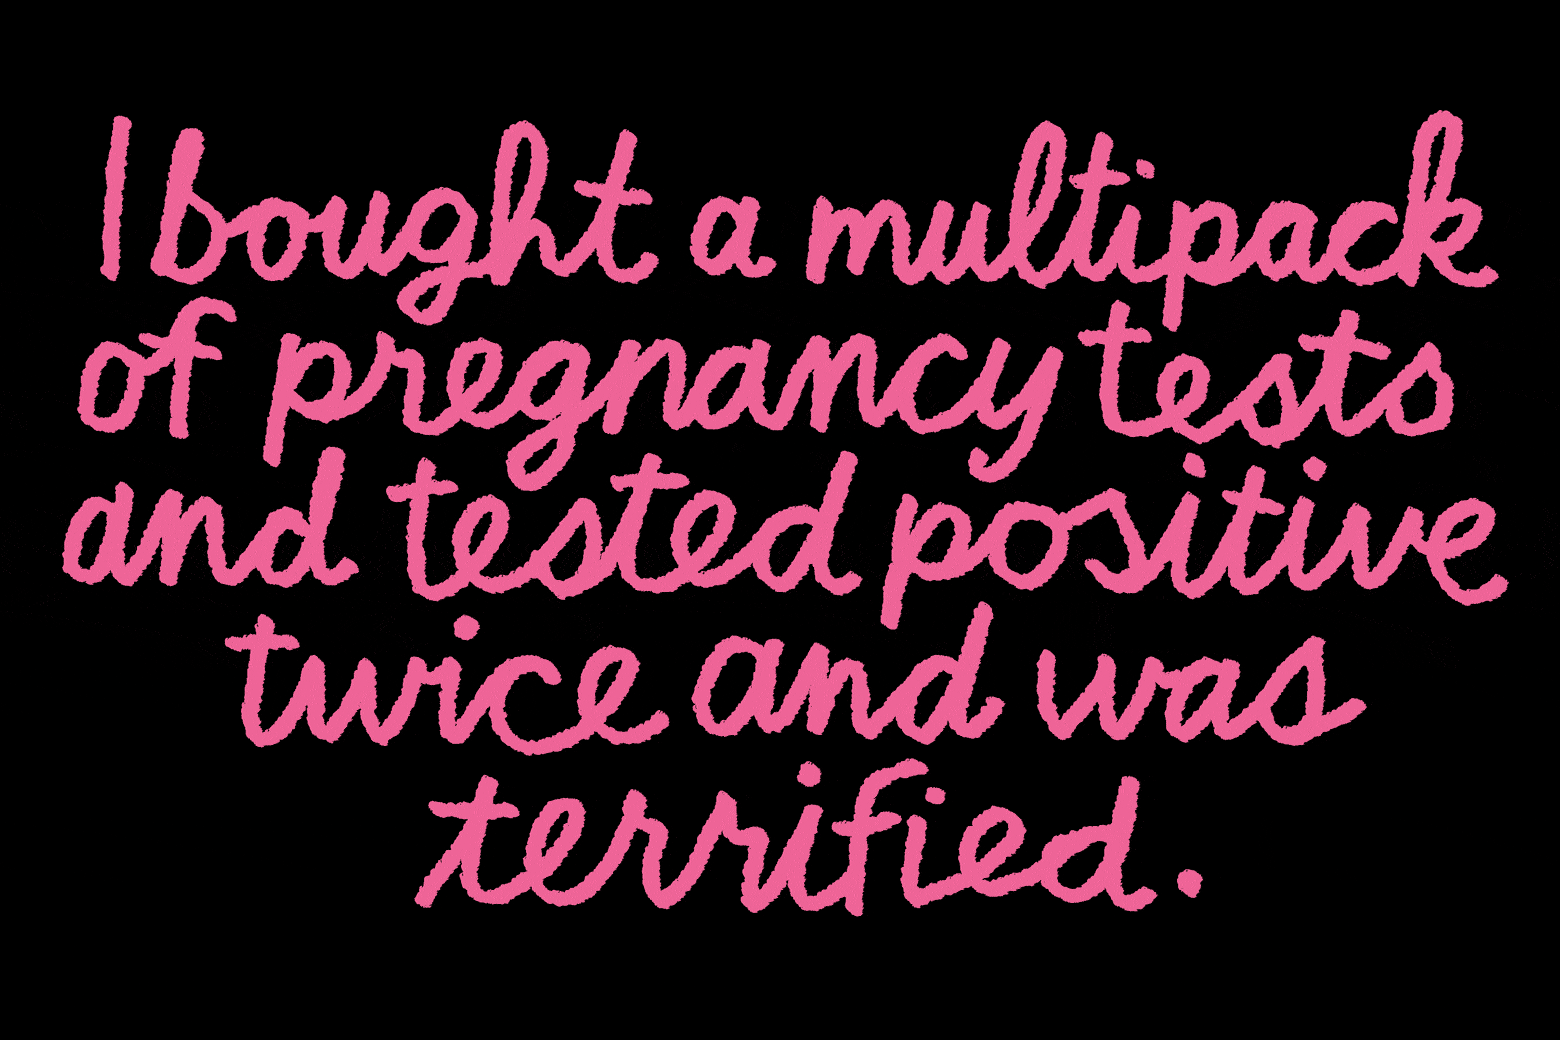 "I bought a multipack of pregnancy tests and tested positive twice and was terrified."